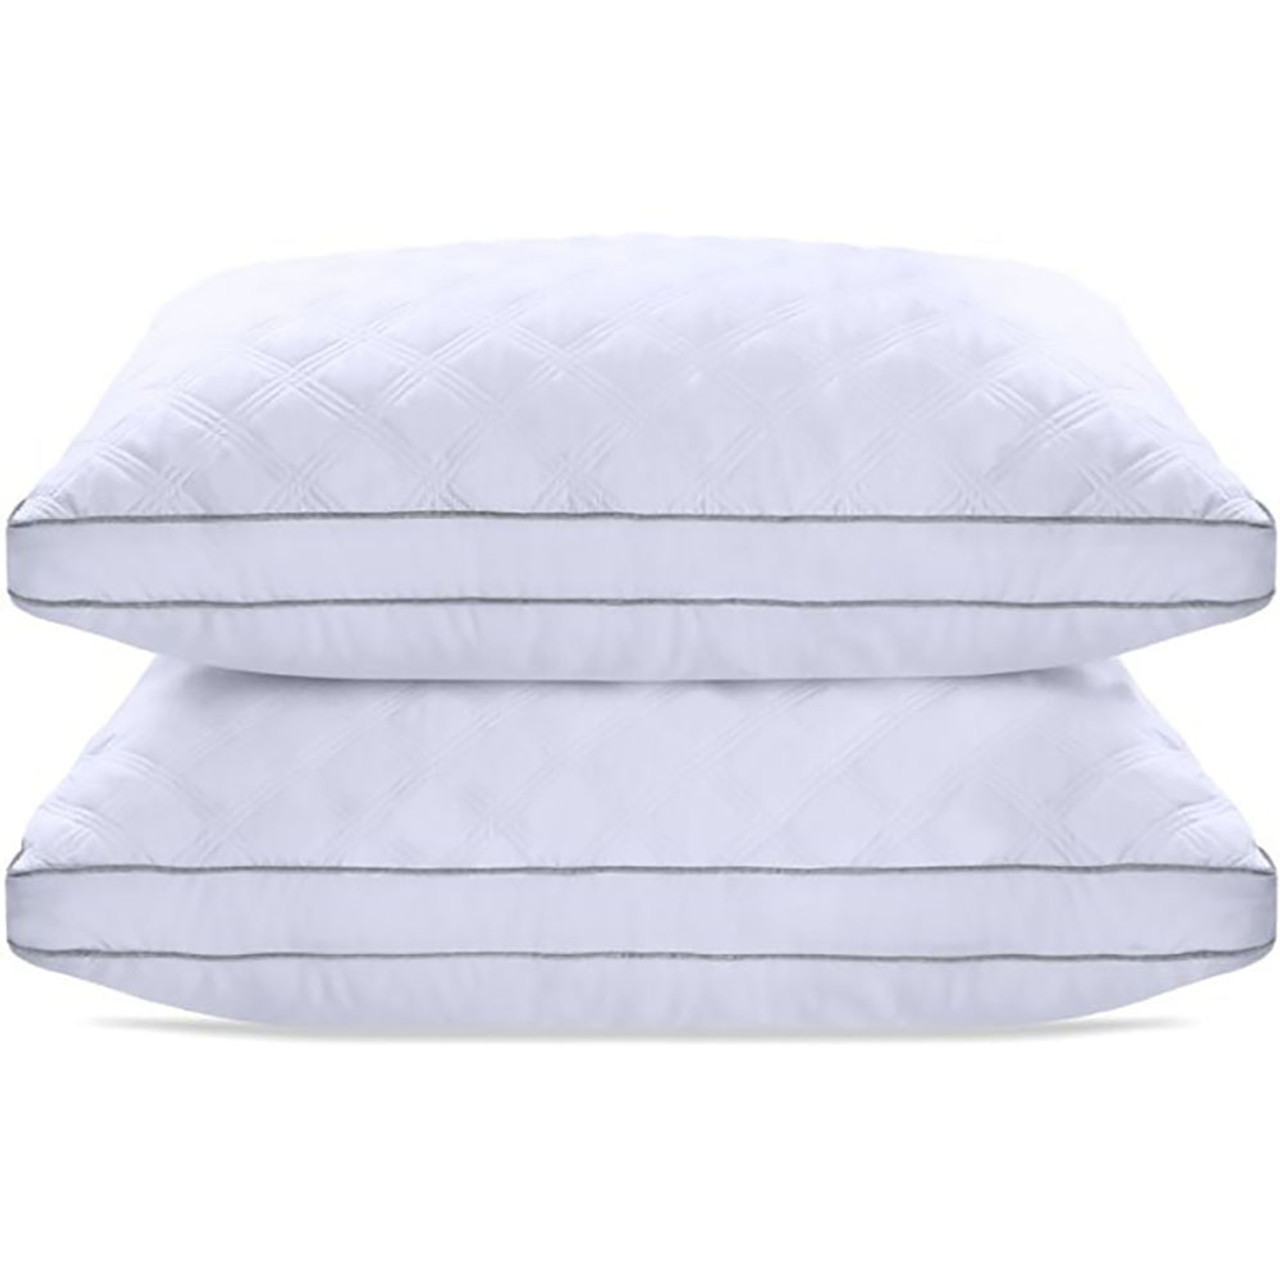 Gusseted Pillows (Set of 2) product image